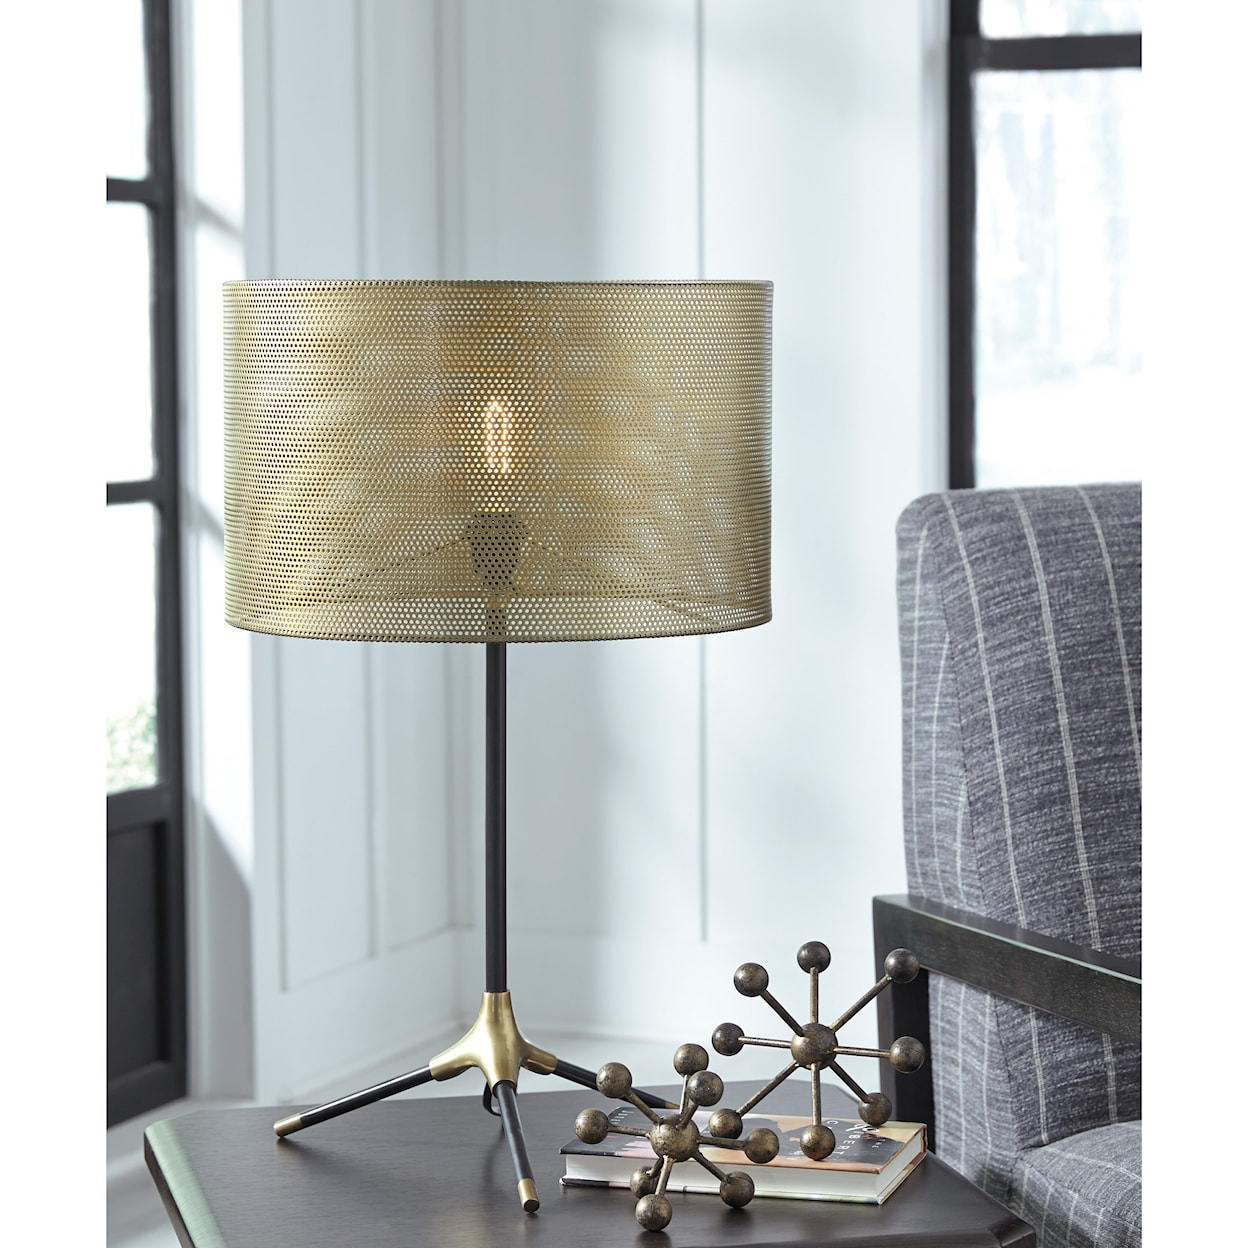 Ashley Furniture Signature Design Lamps - Contemporary Mance Gray/Brass Finish Metal Table Lamp